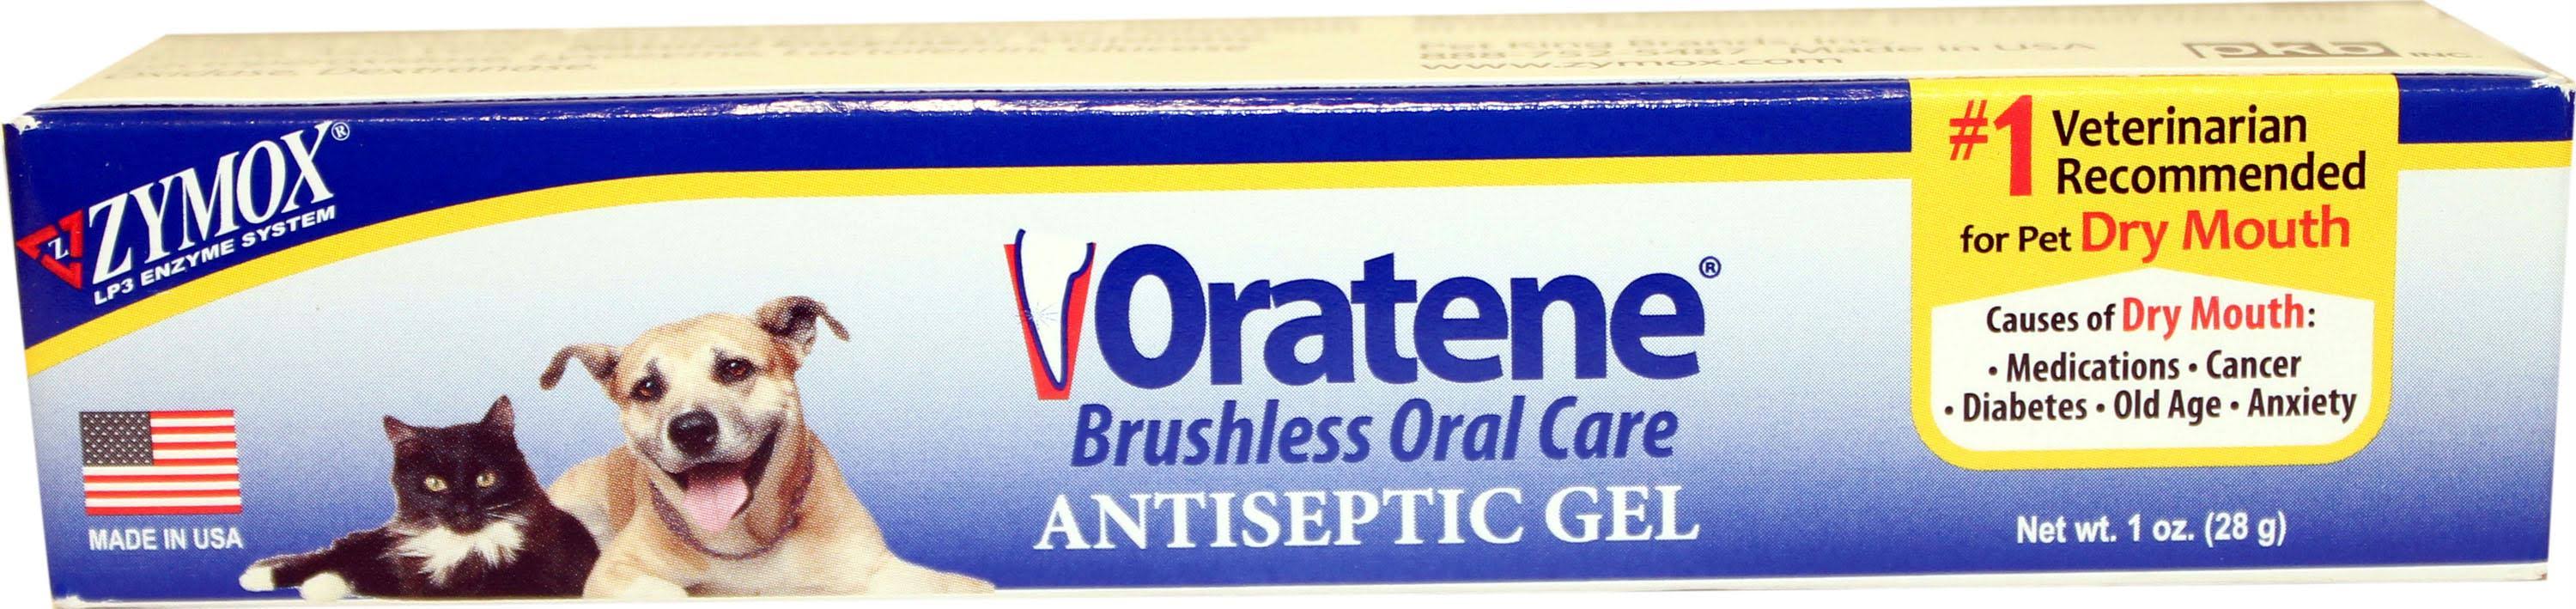 Oratene Veterinarian Antiseptic Oral Gel for Dogs and Cats - 1oz